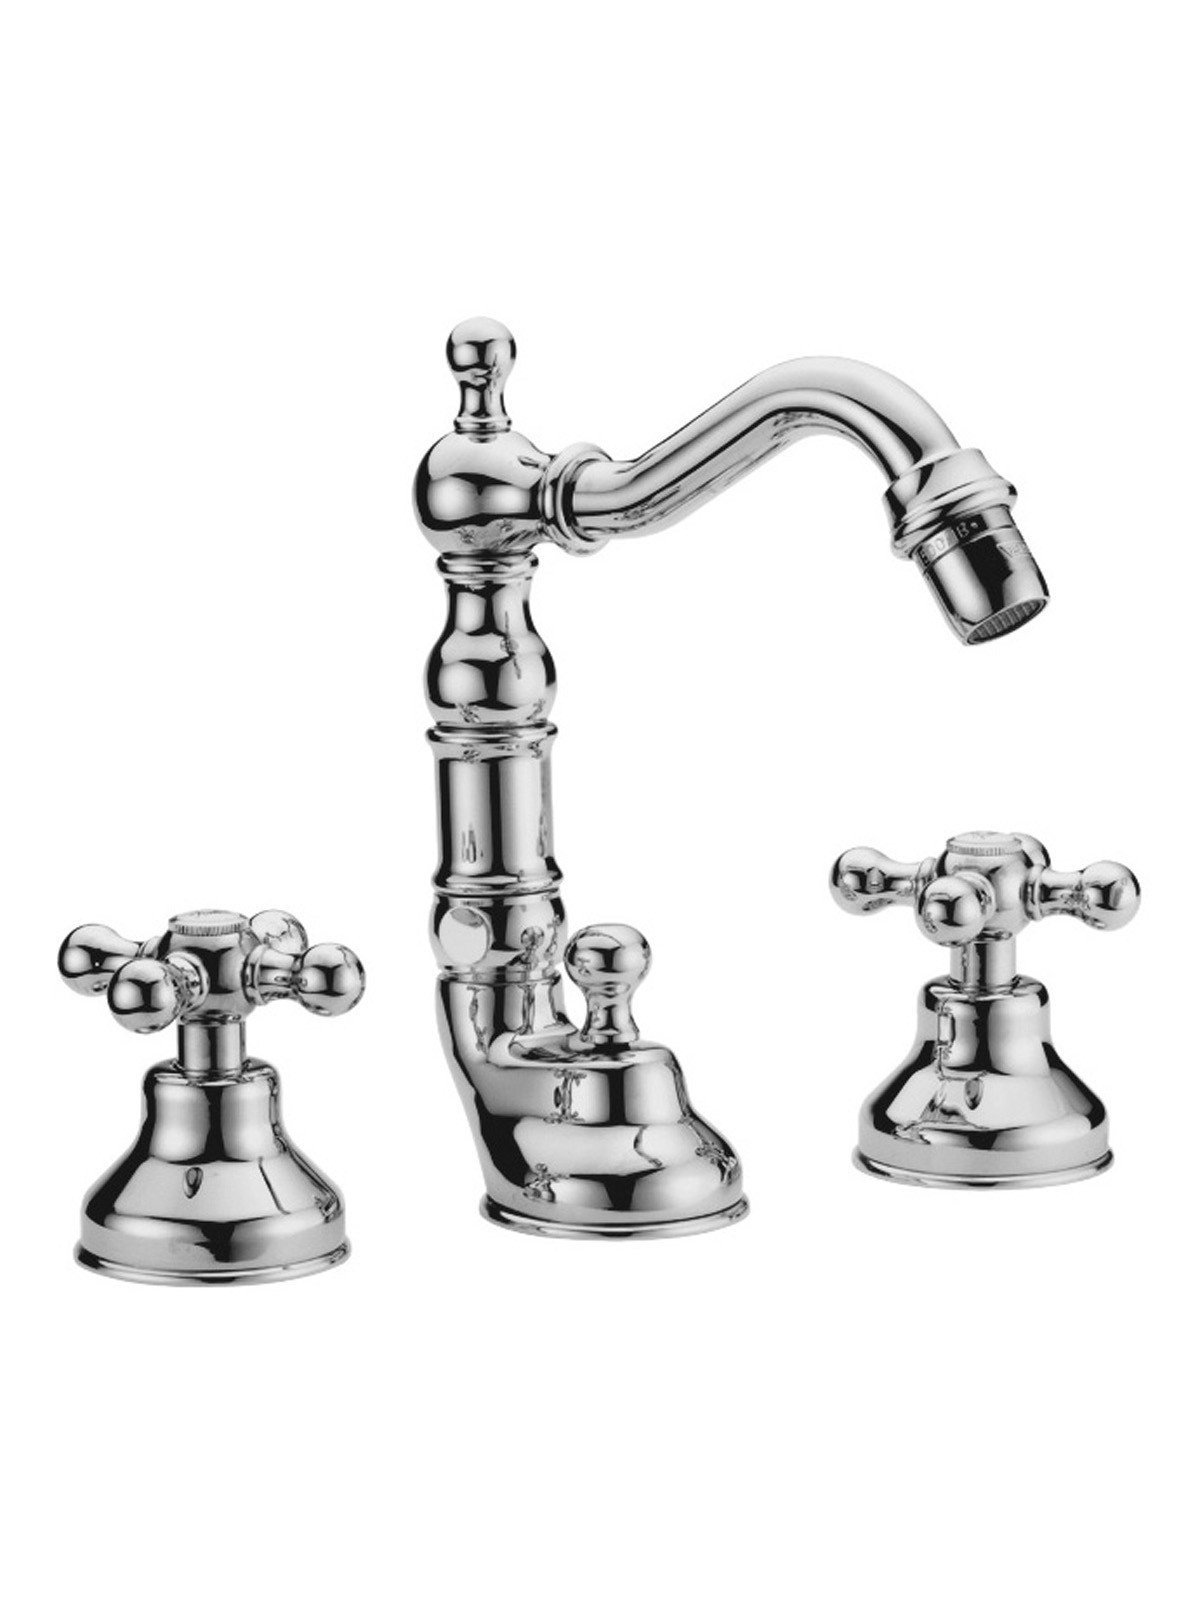 3 hole bidet mixer with vintage spout and  waste